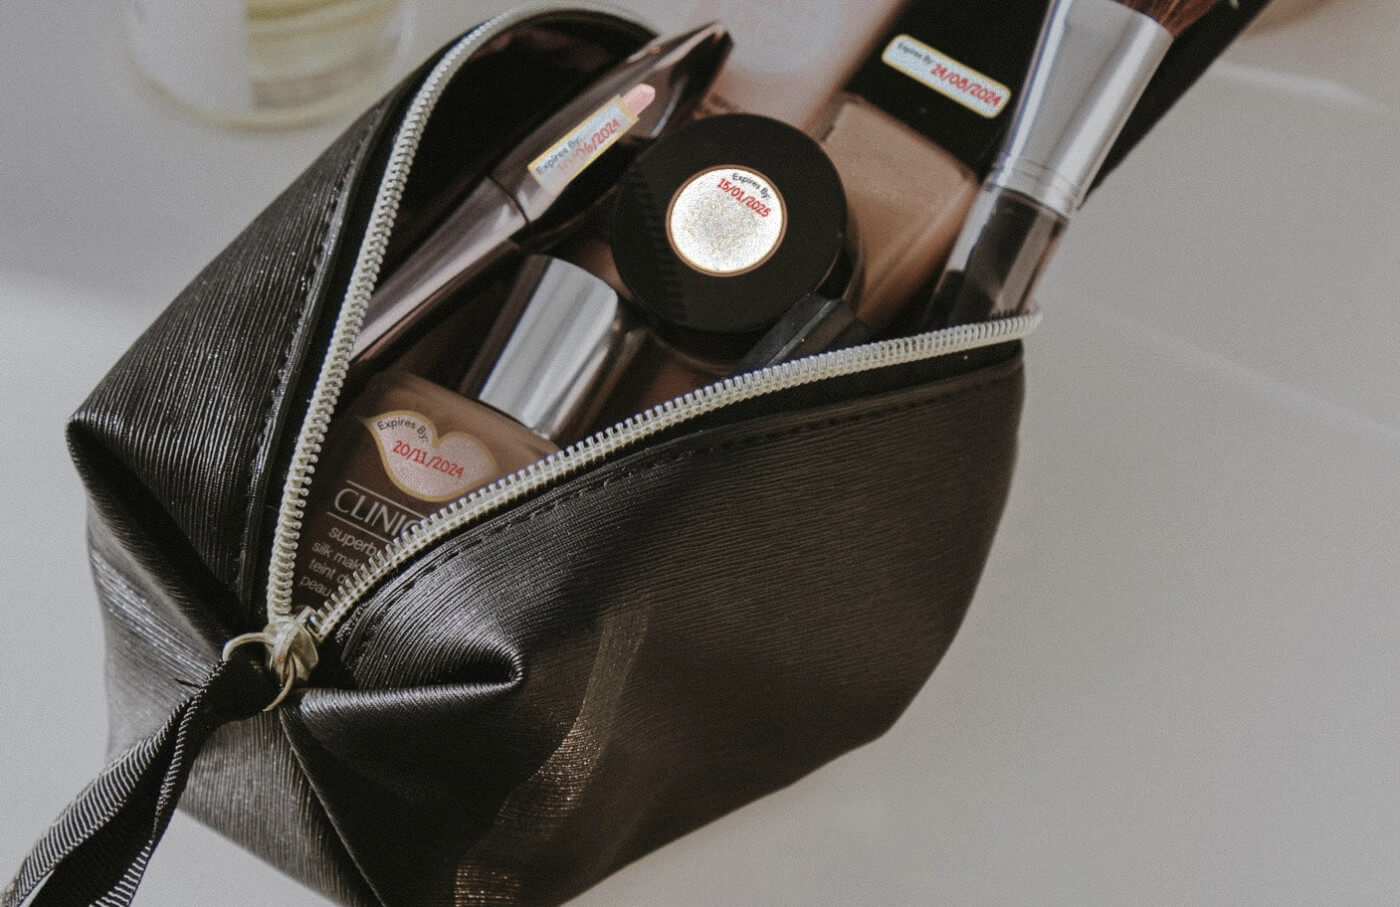 HOW LONG IS YOUR MAKEUP GOOD FOR AFTER OPENING? – Date My Make-Up